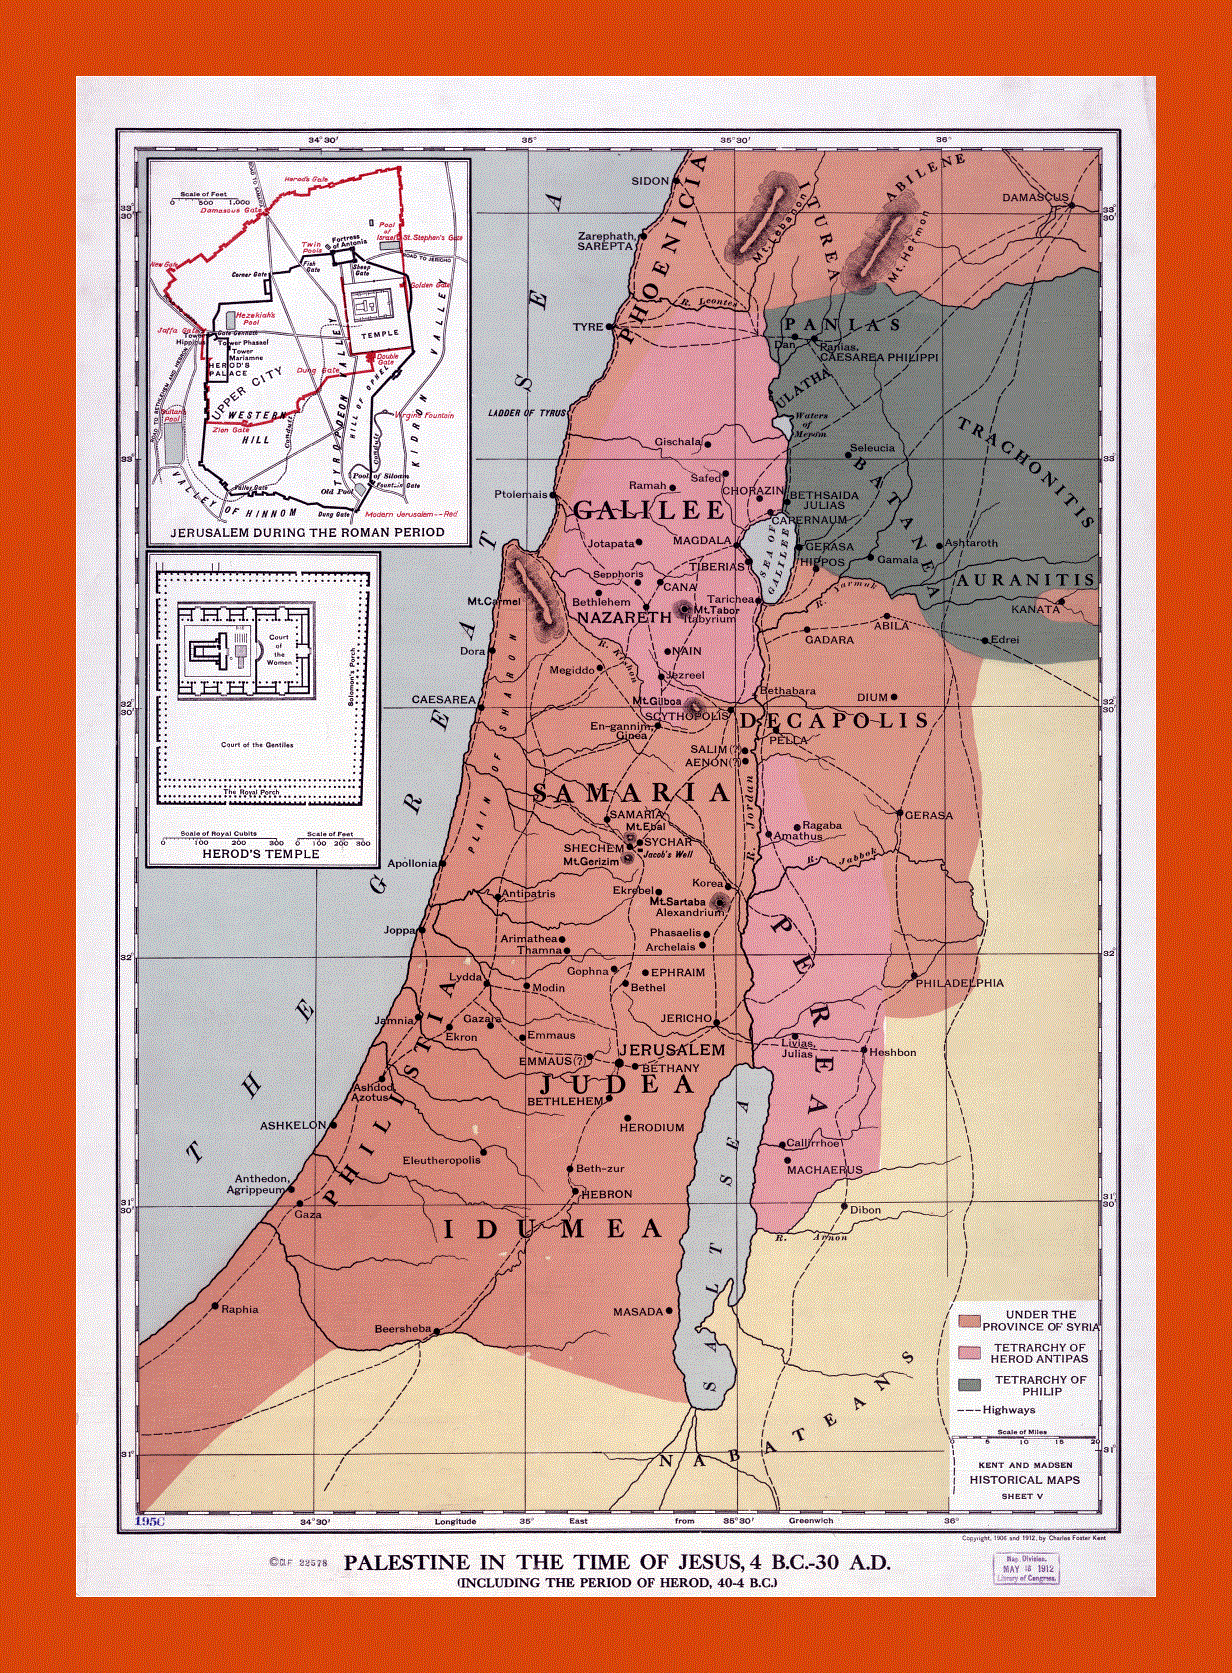 Old map of Palestine in the time of Jesus 4 B.C. - 30 A.D. - 1912